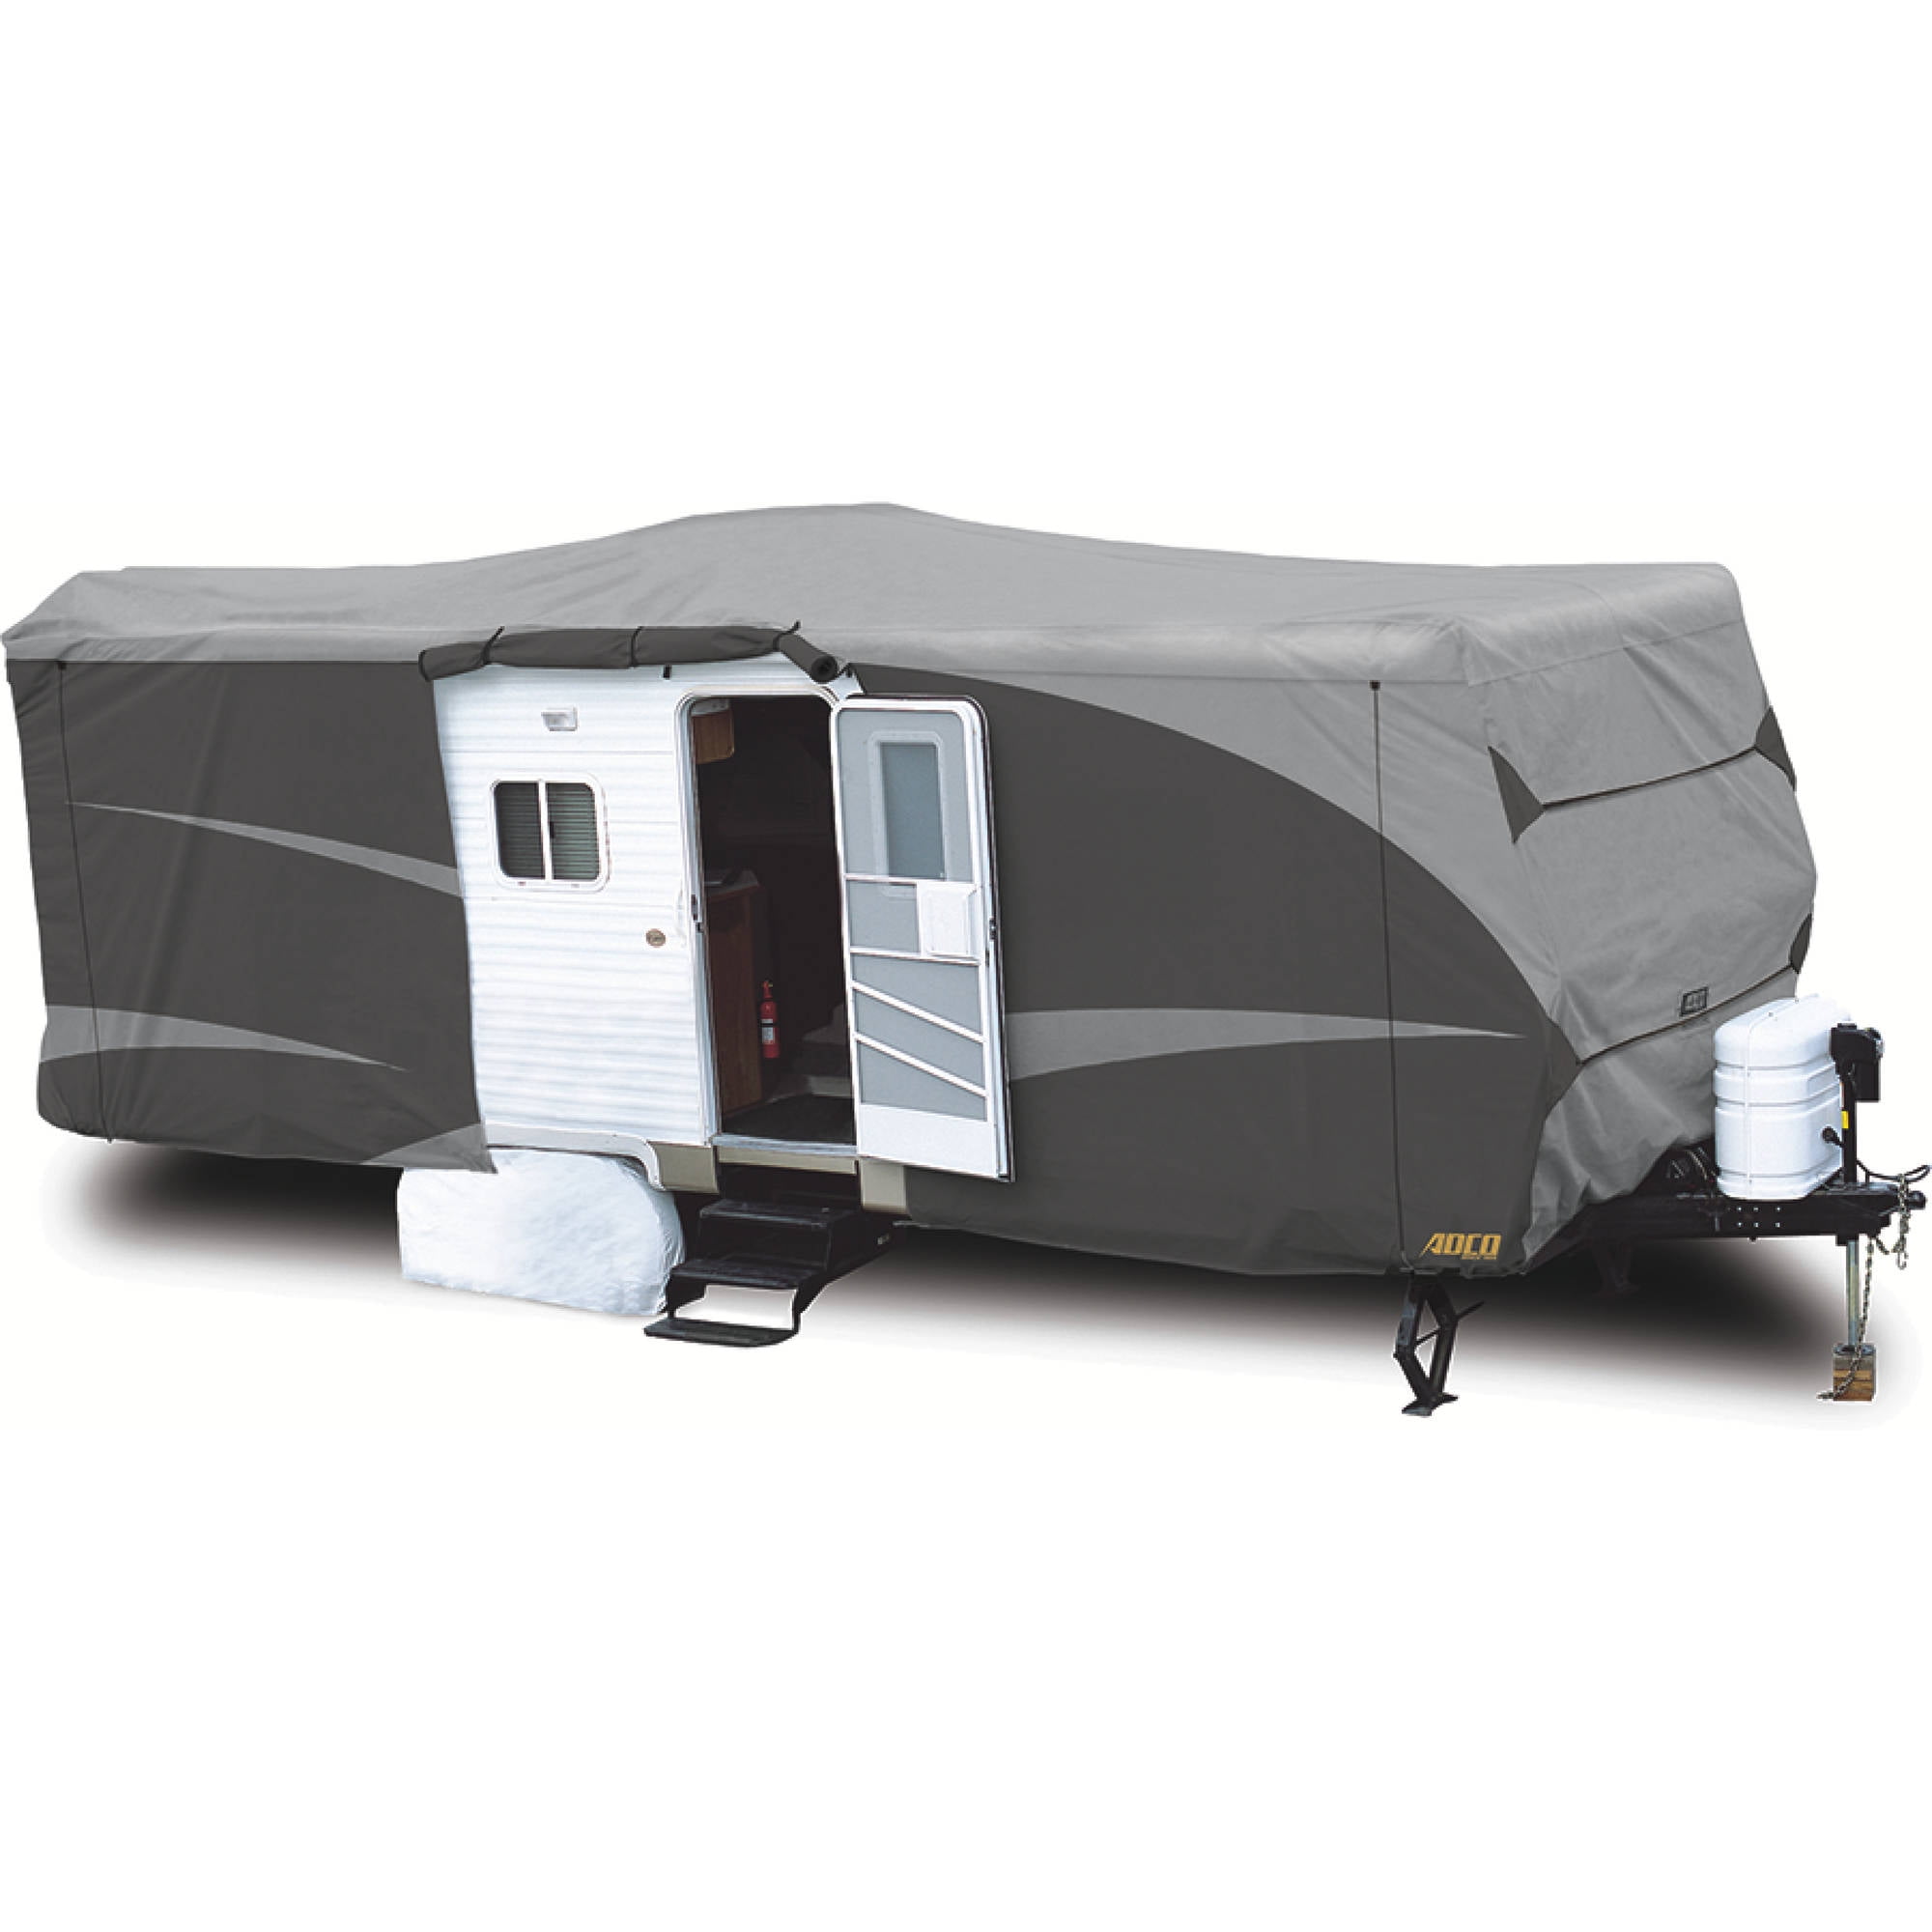 ADCO RV Covers, Travel Trailer Covers, ADCO Products